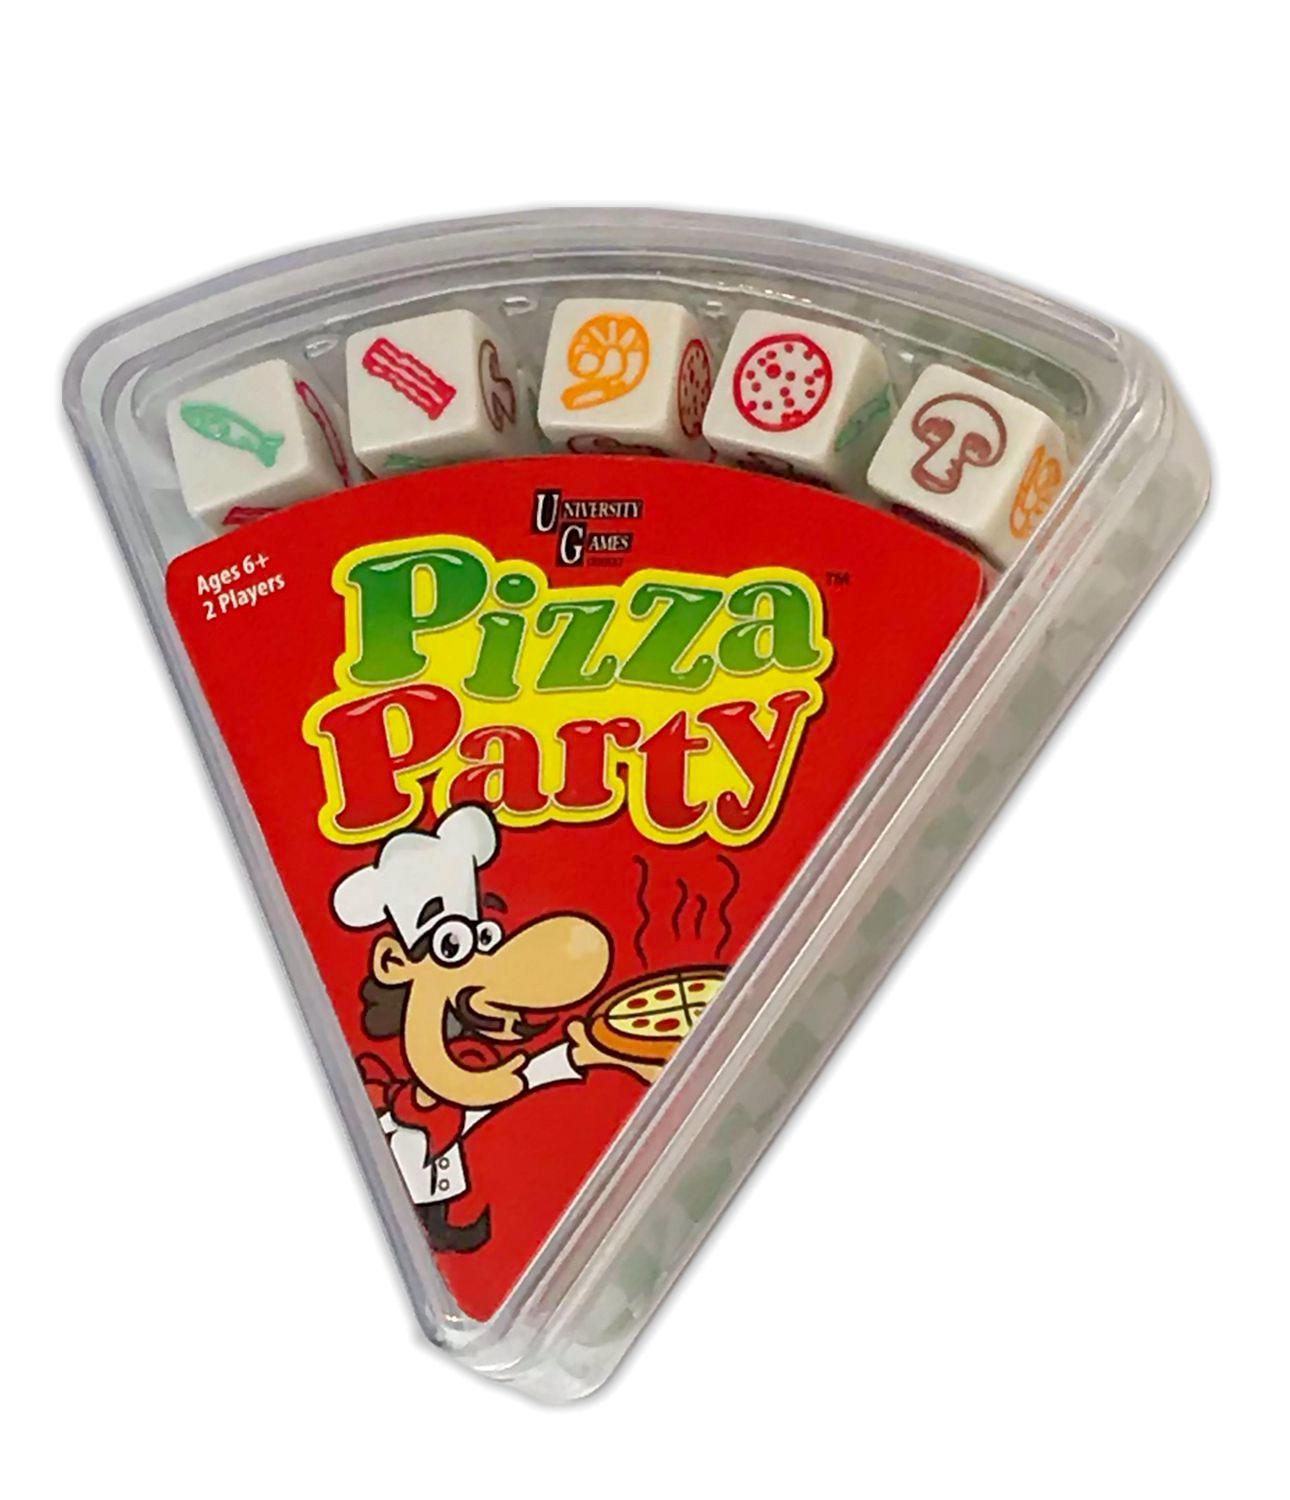 Pizza-slice shaped clear box containing five dice with food items on each side and a red cover reading "Pizza Party" and a cartoon chef with white hat below.